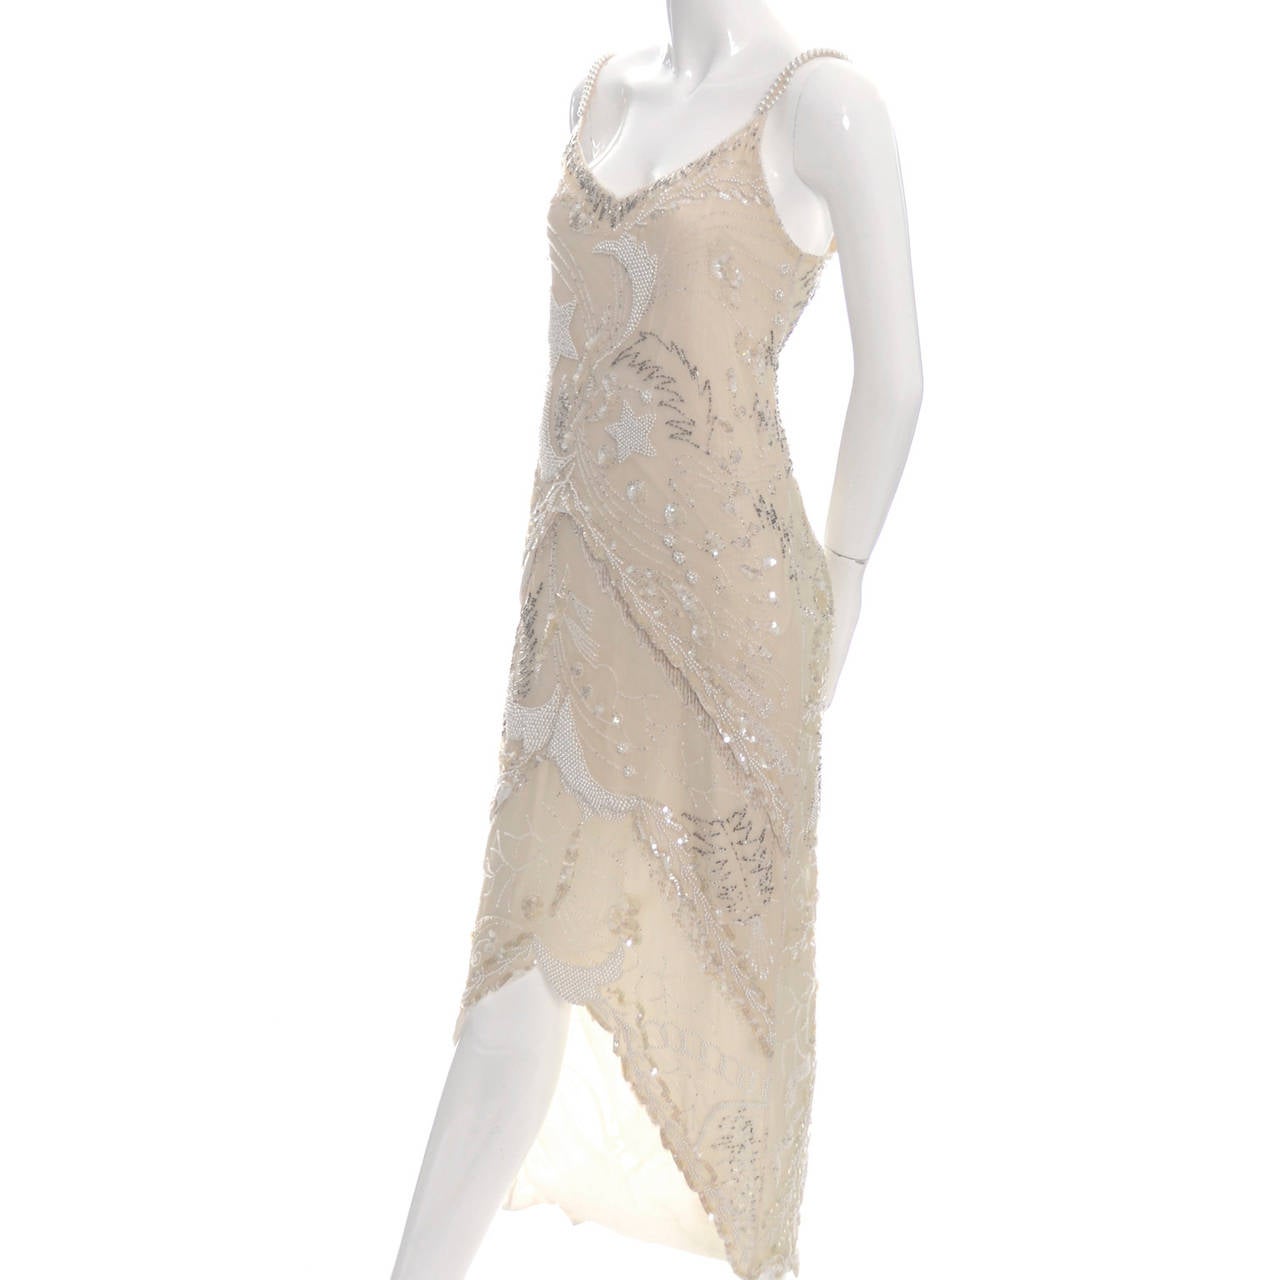 I fell in love with this vintage 1970's Oleg Cassini pale cream silk dress the minute I saw it! The estate had mostly amazing Japanese and Chinese vintage garments for which I was originally contacted, and though I did end up buying many of those,